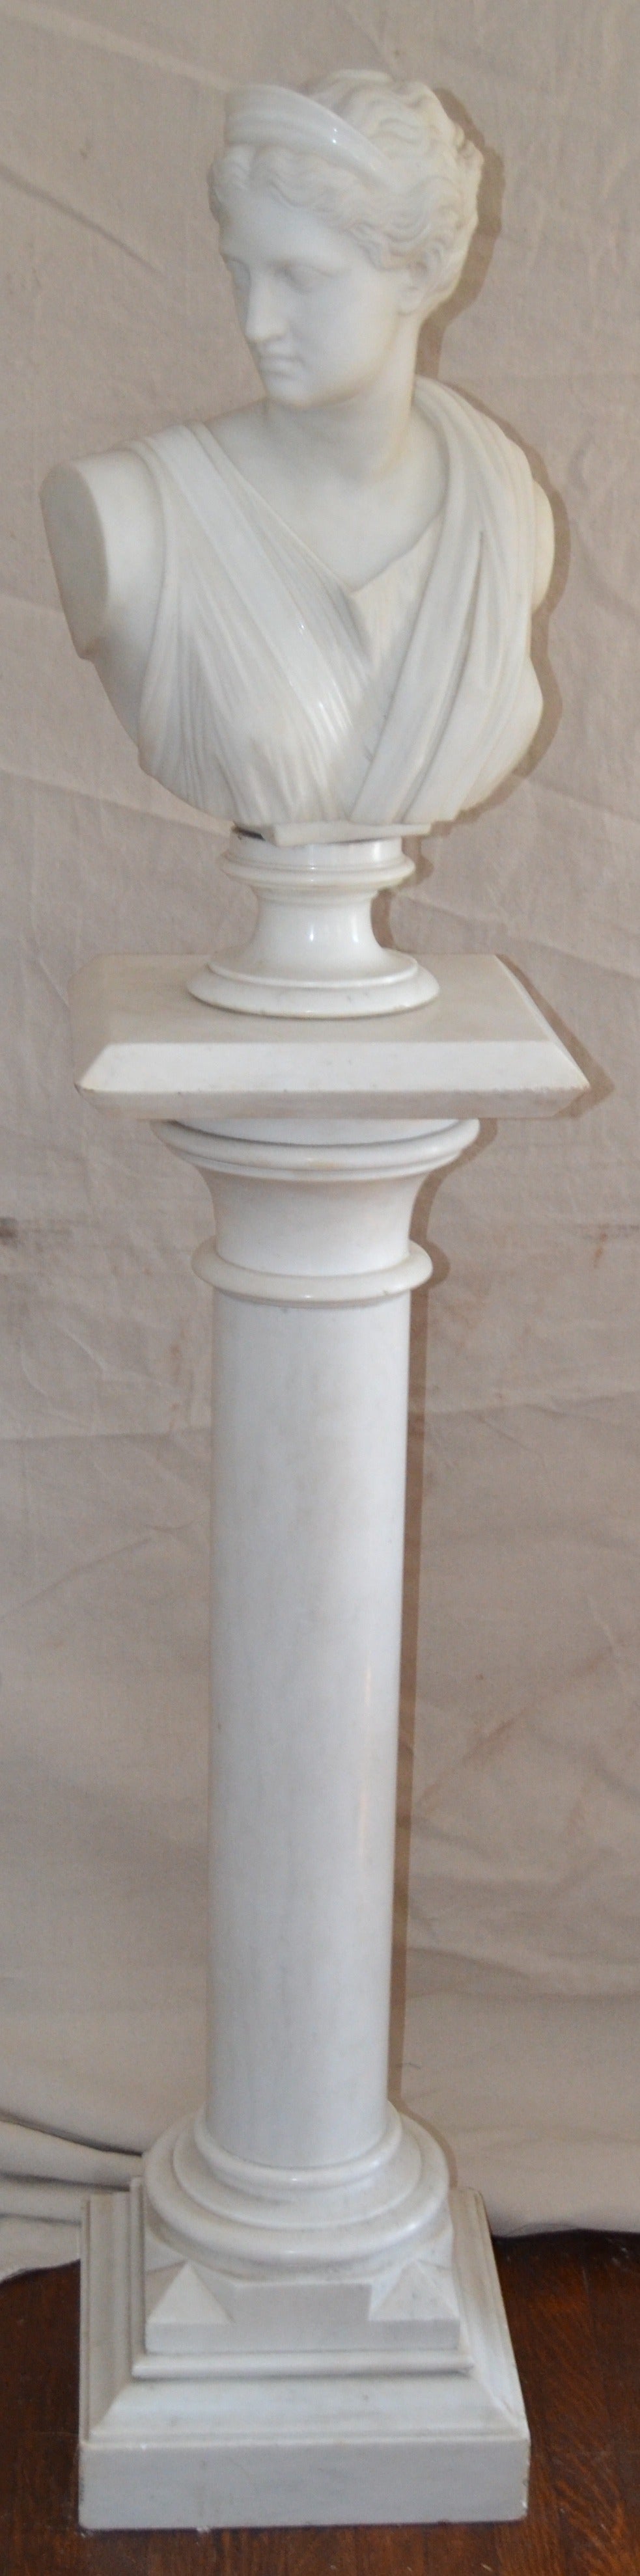 Well executed white marble bust of the goddess, Diana, on the associated pedestal. After the antique, Diana is 24 inches high including socle, pedestal is 44.5 inches high and 13 x 13 inches.